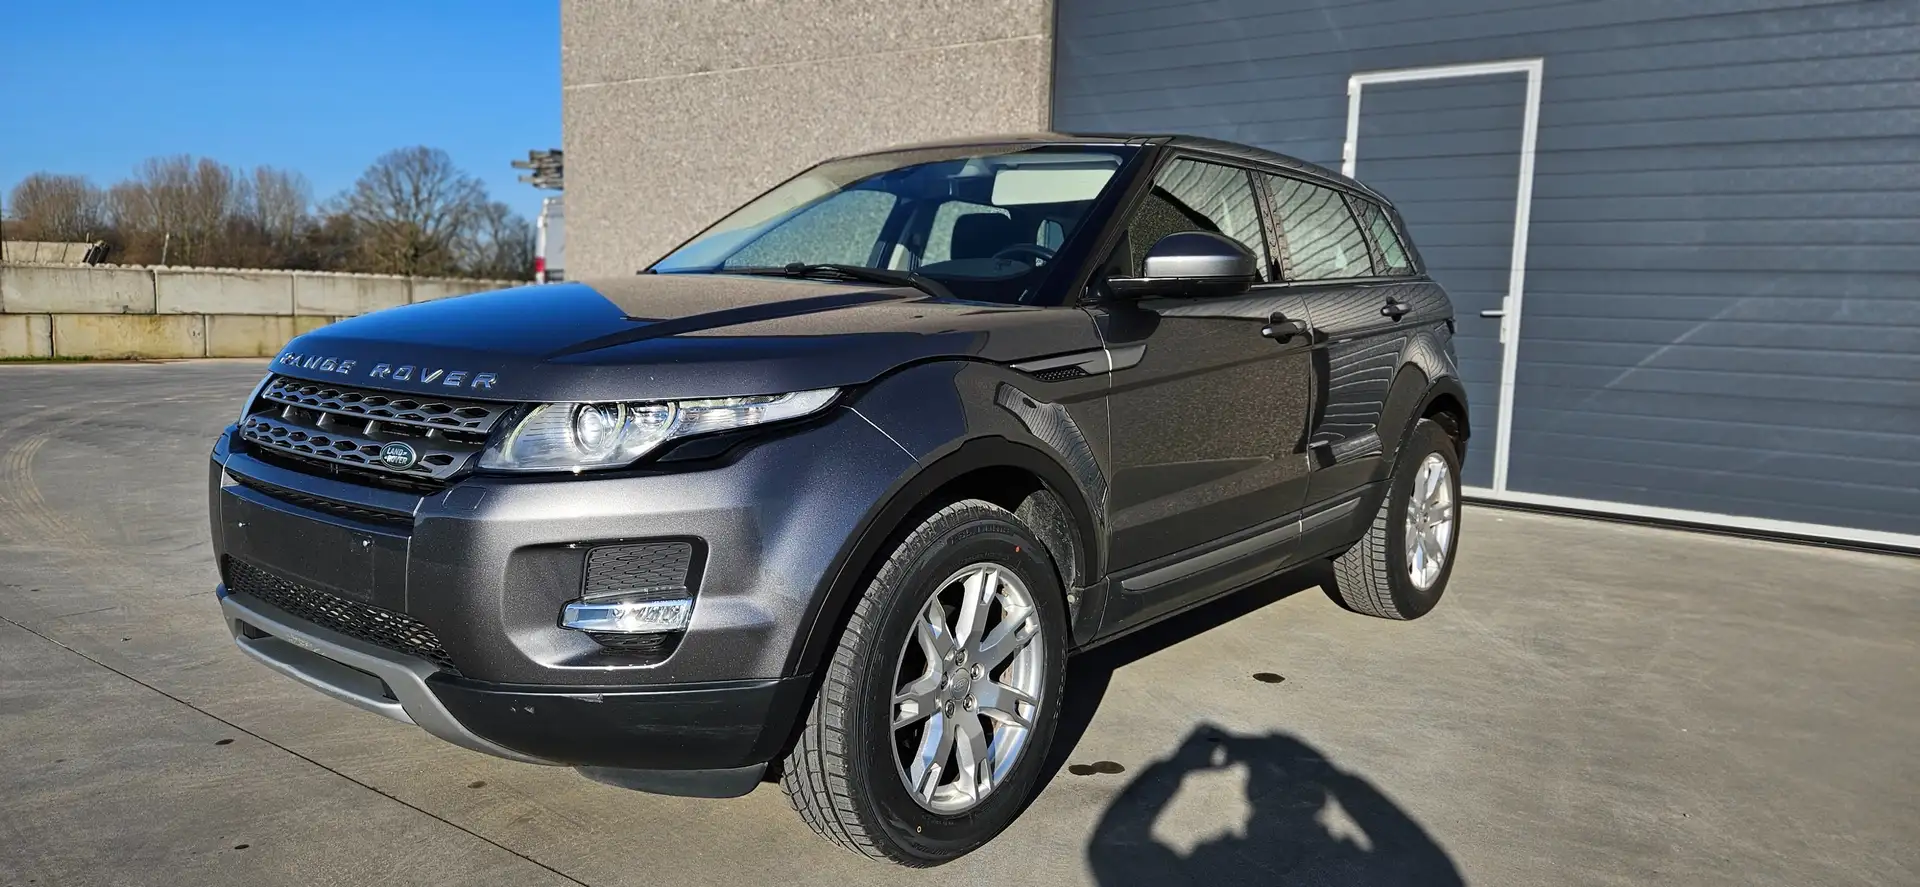 Land Rover Range Rover Evoque 2.2 eD4 2WD Pure MARCHAND+EXPORT Gris - 1